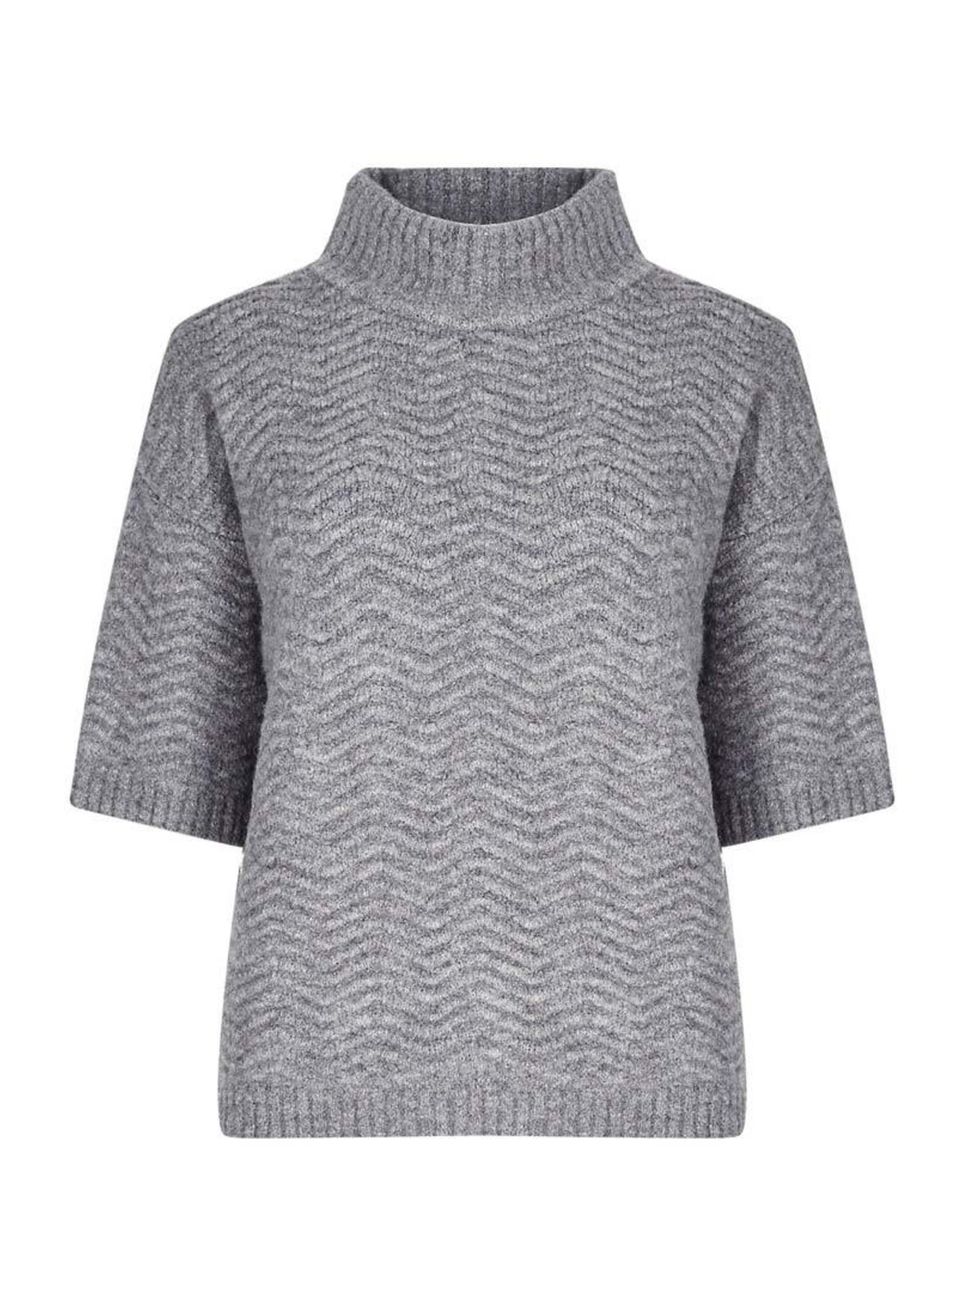 <p>Associate Health & Beauty Editor Amy Lawrenson's latest buy was made for chilly winter days.</p>

<p><a href="http://www.marksandspencer.com/turtle-neck-chevron-jumper-with-wool/p/p60067034#" target="_blank">Marks & Spencer</a> jumper, £39.50</p>